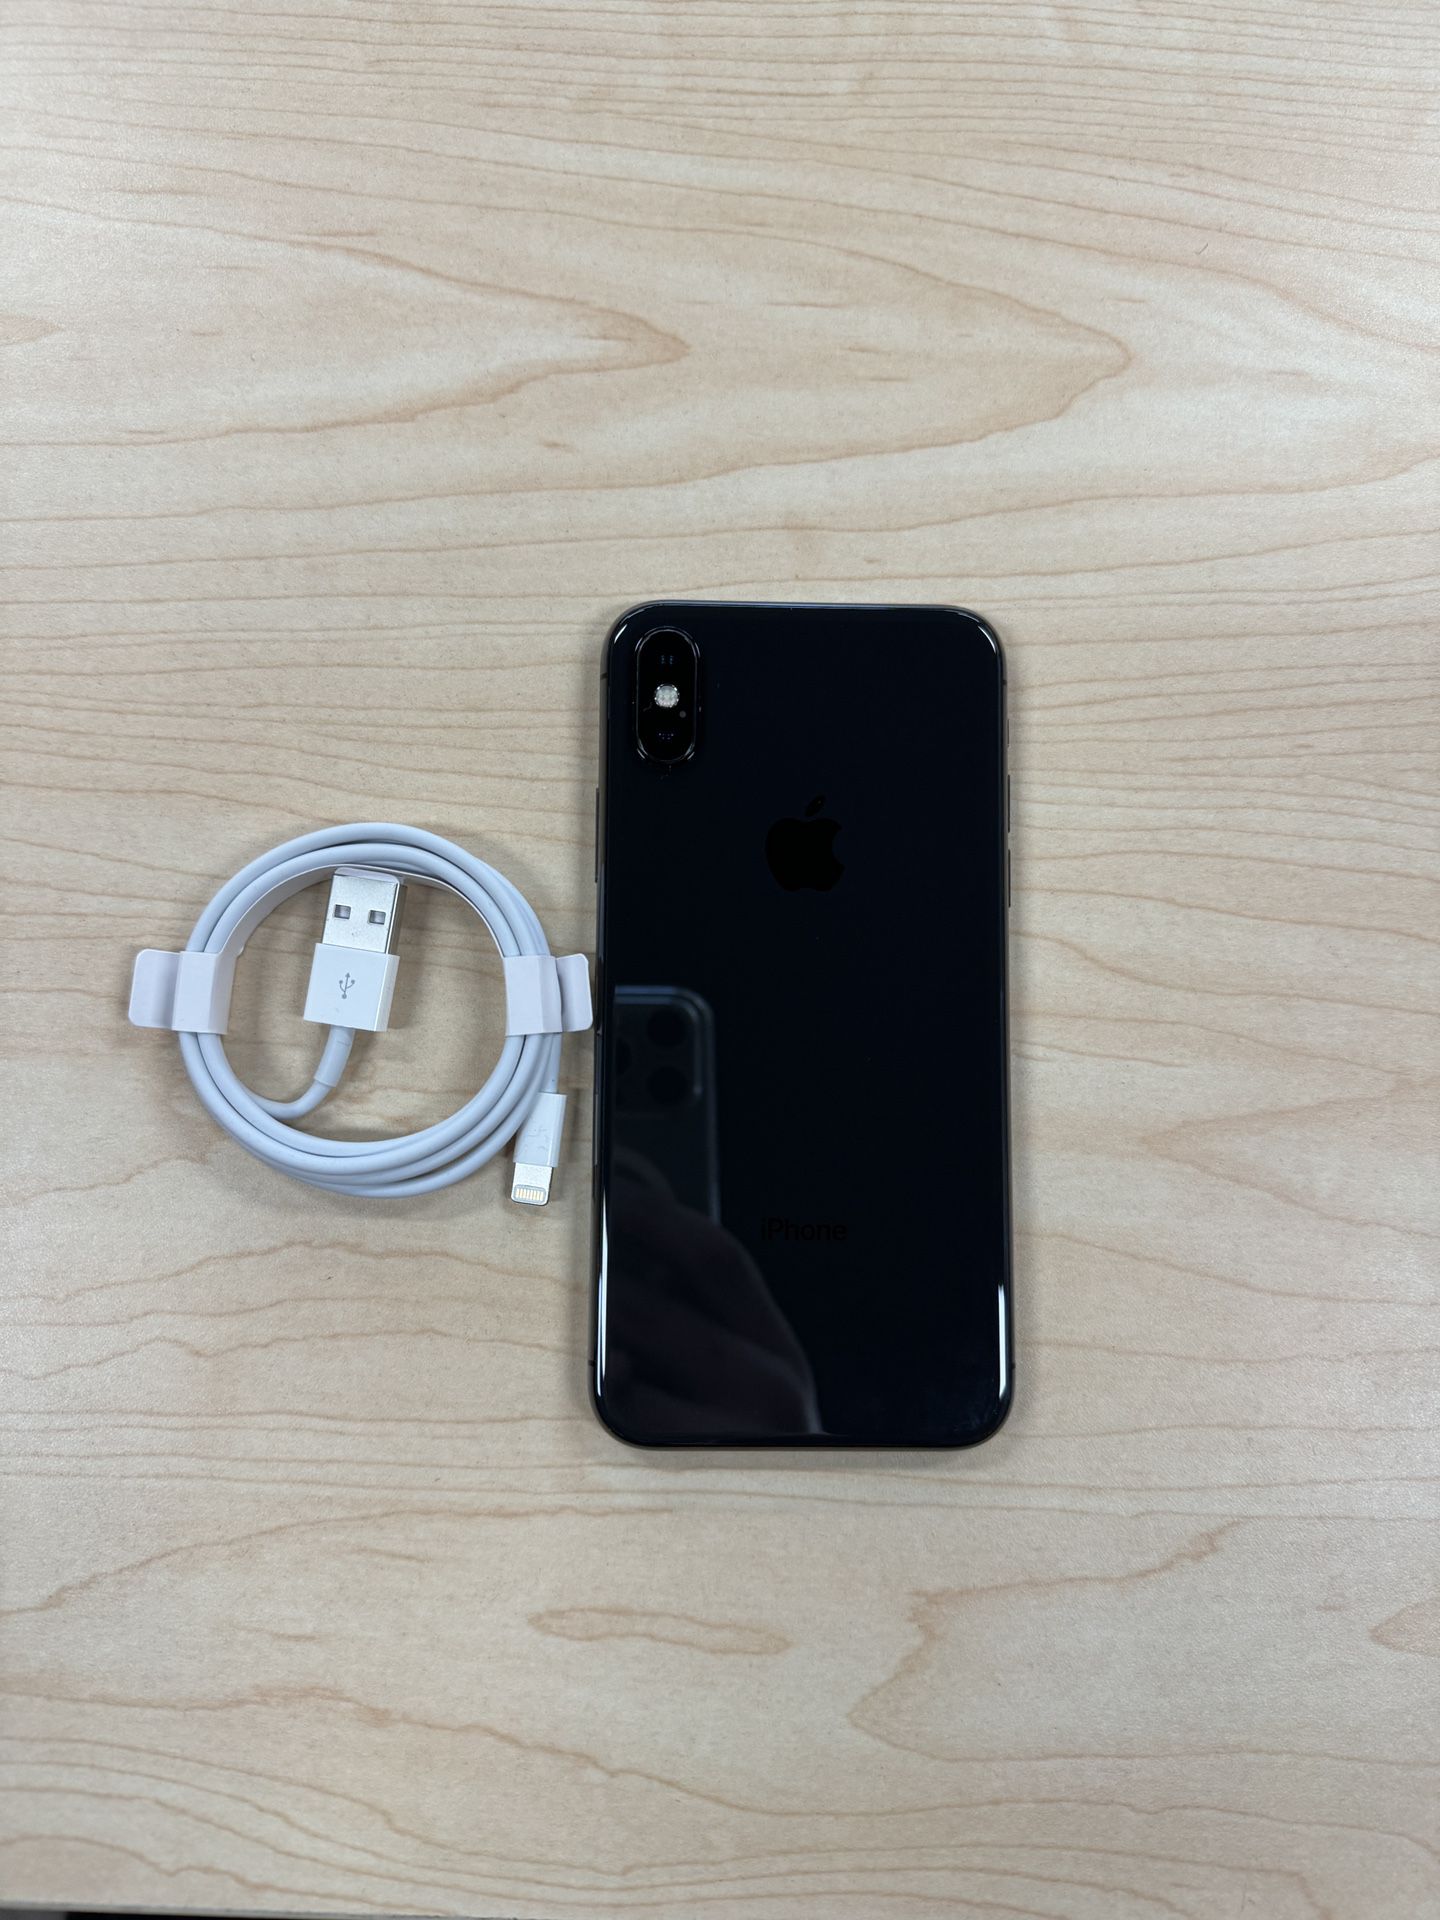 iPhone X - 64GB - Unlocked For Any Carrier!!!